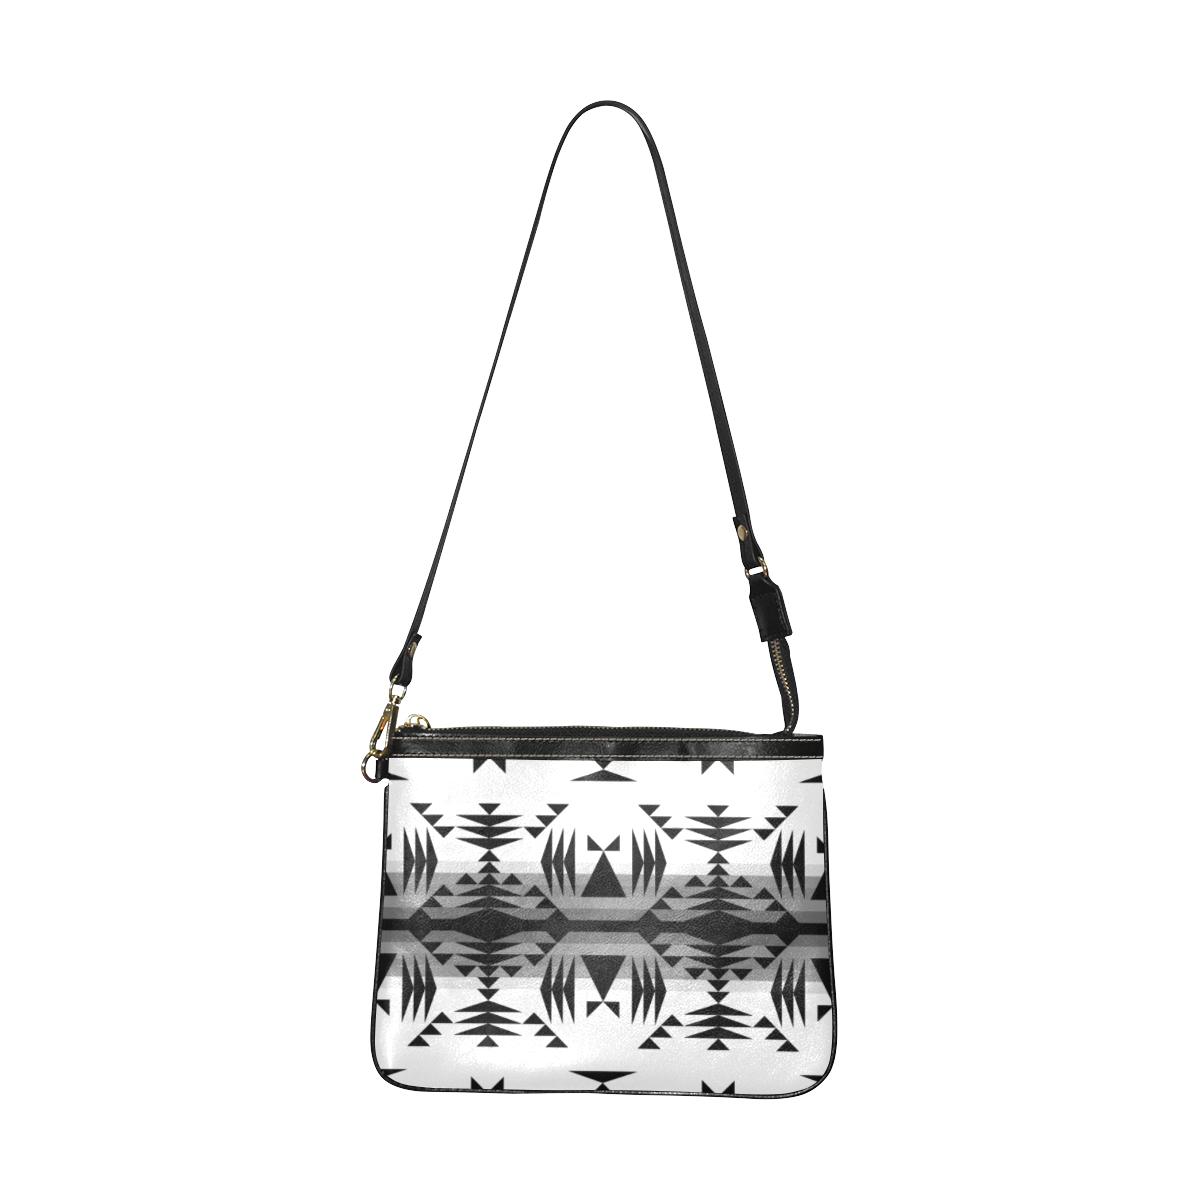 Between the Mountains White and Black Small Shoulder Bag (Model 1710) Small Shoulder Bag (1710) e-joyer 